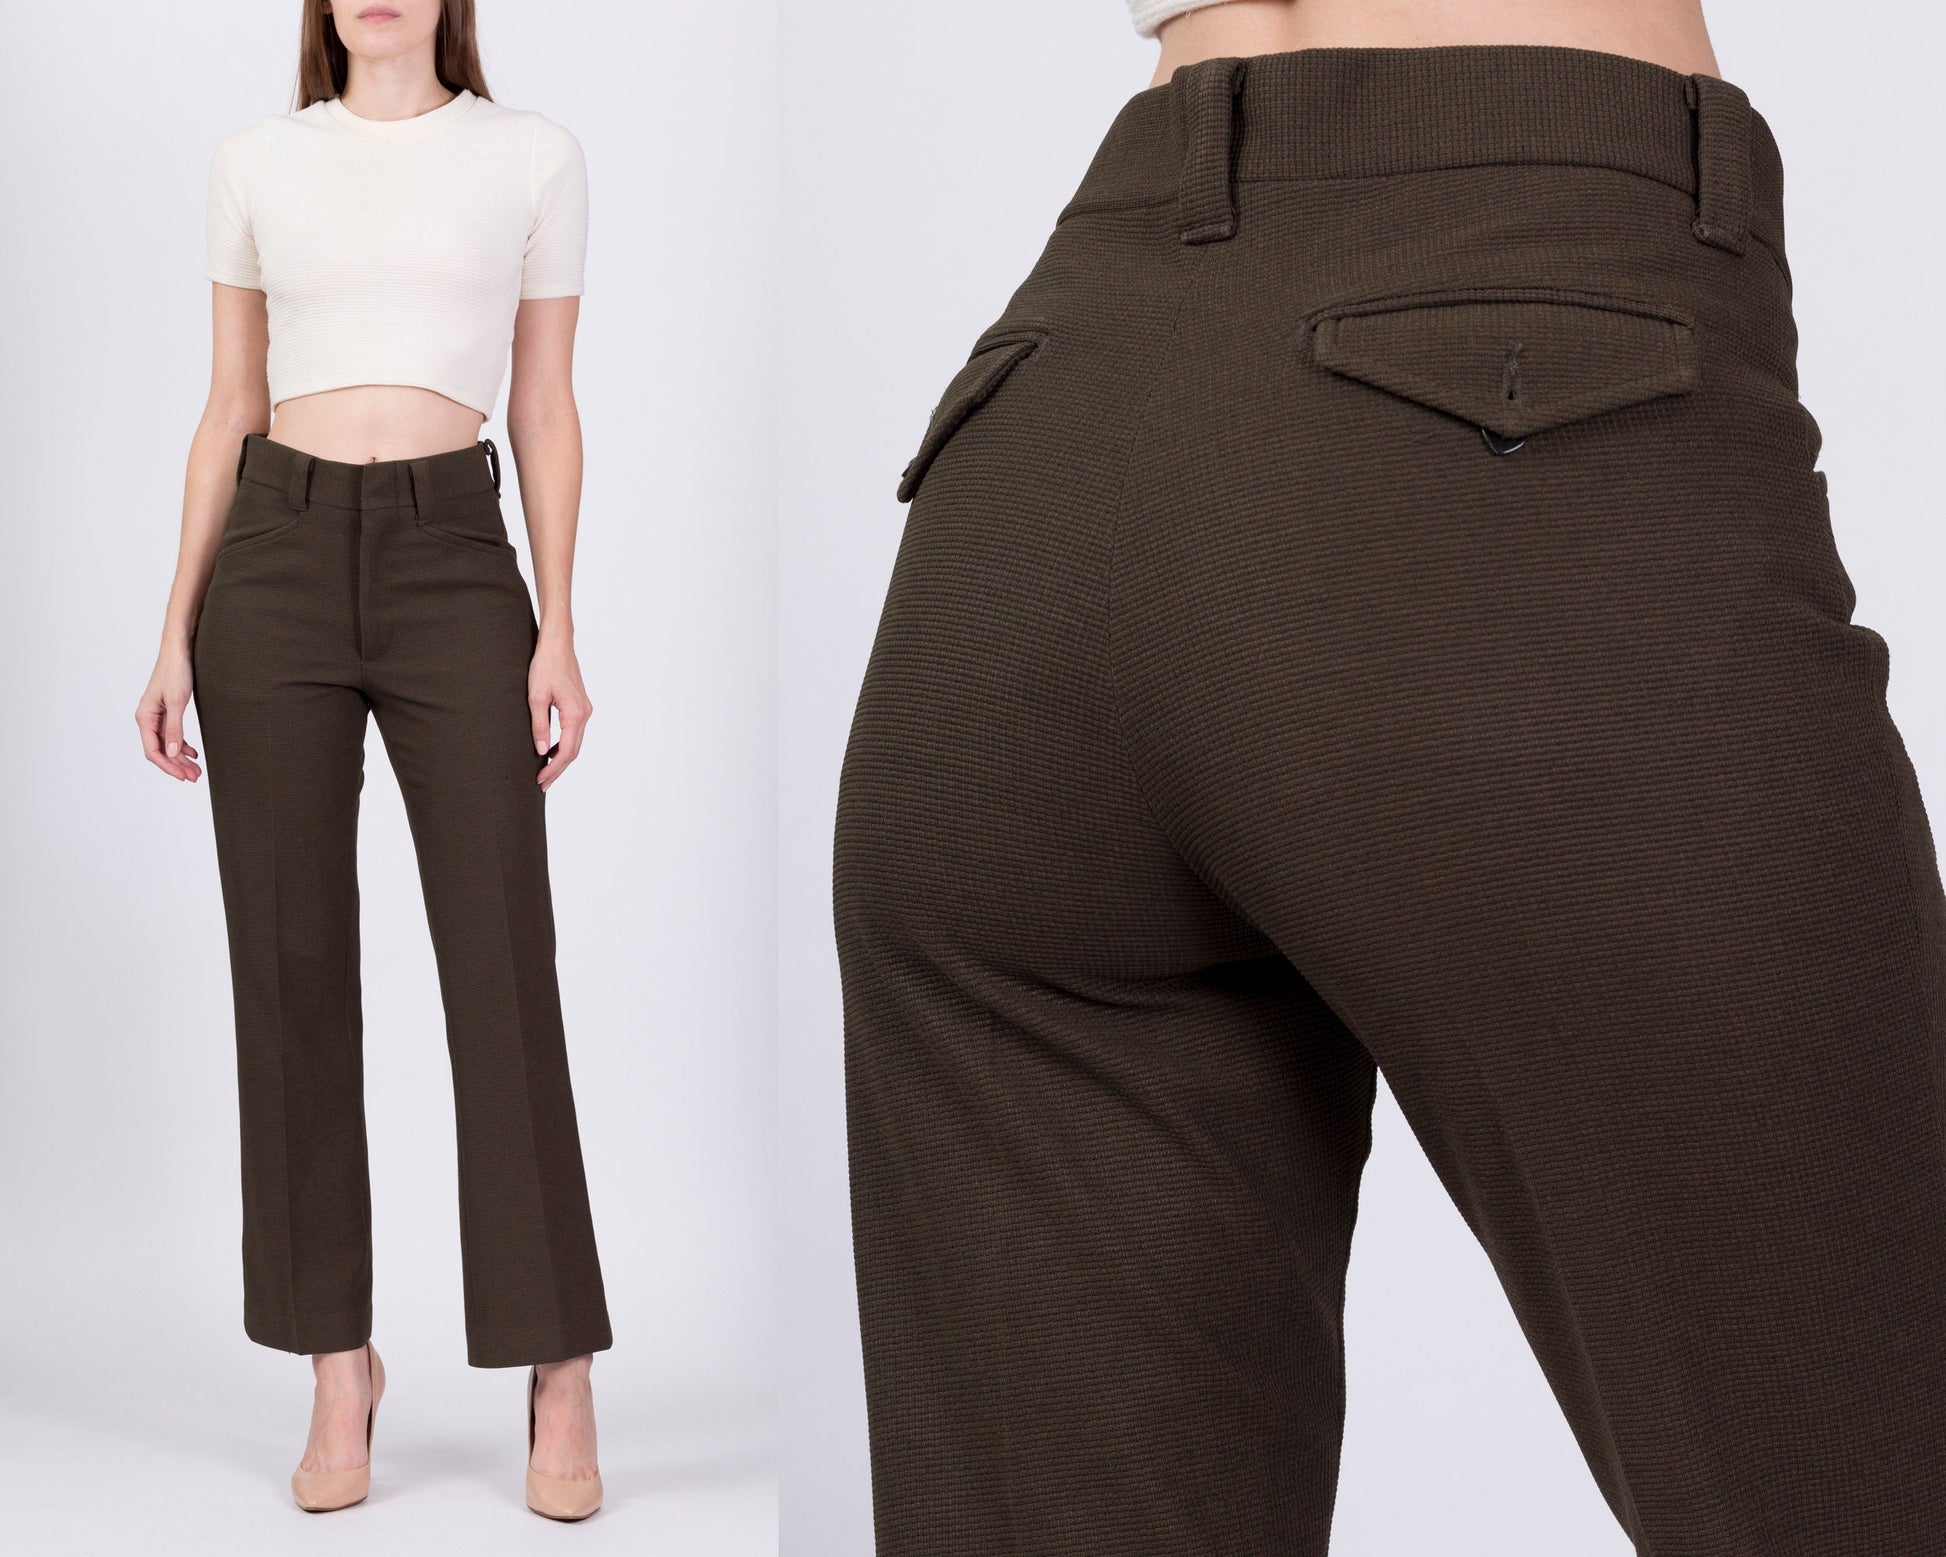 70s Olive Green Unisex High Waisted Trousers - 29" Waist 